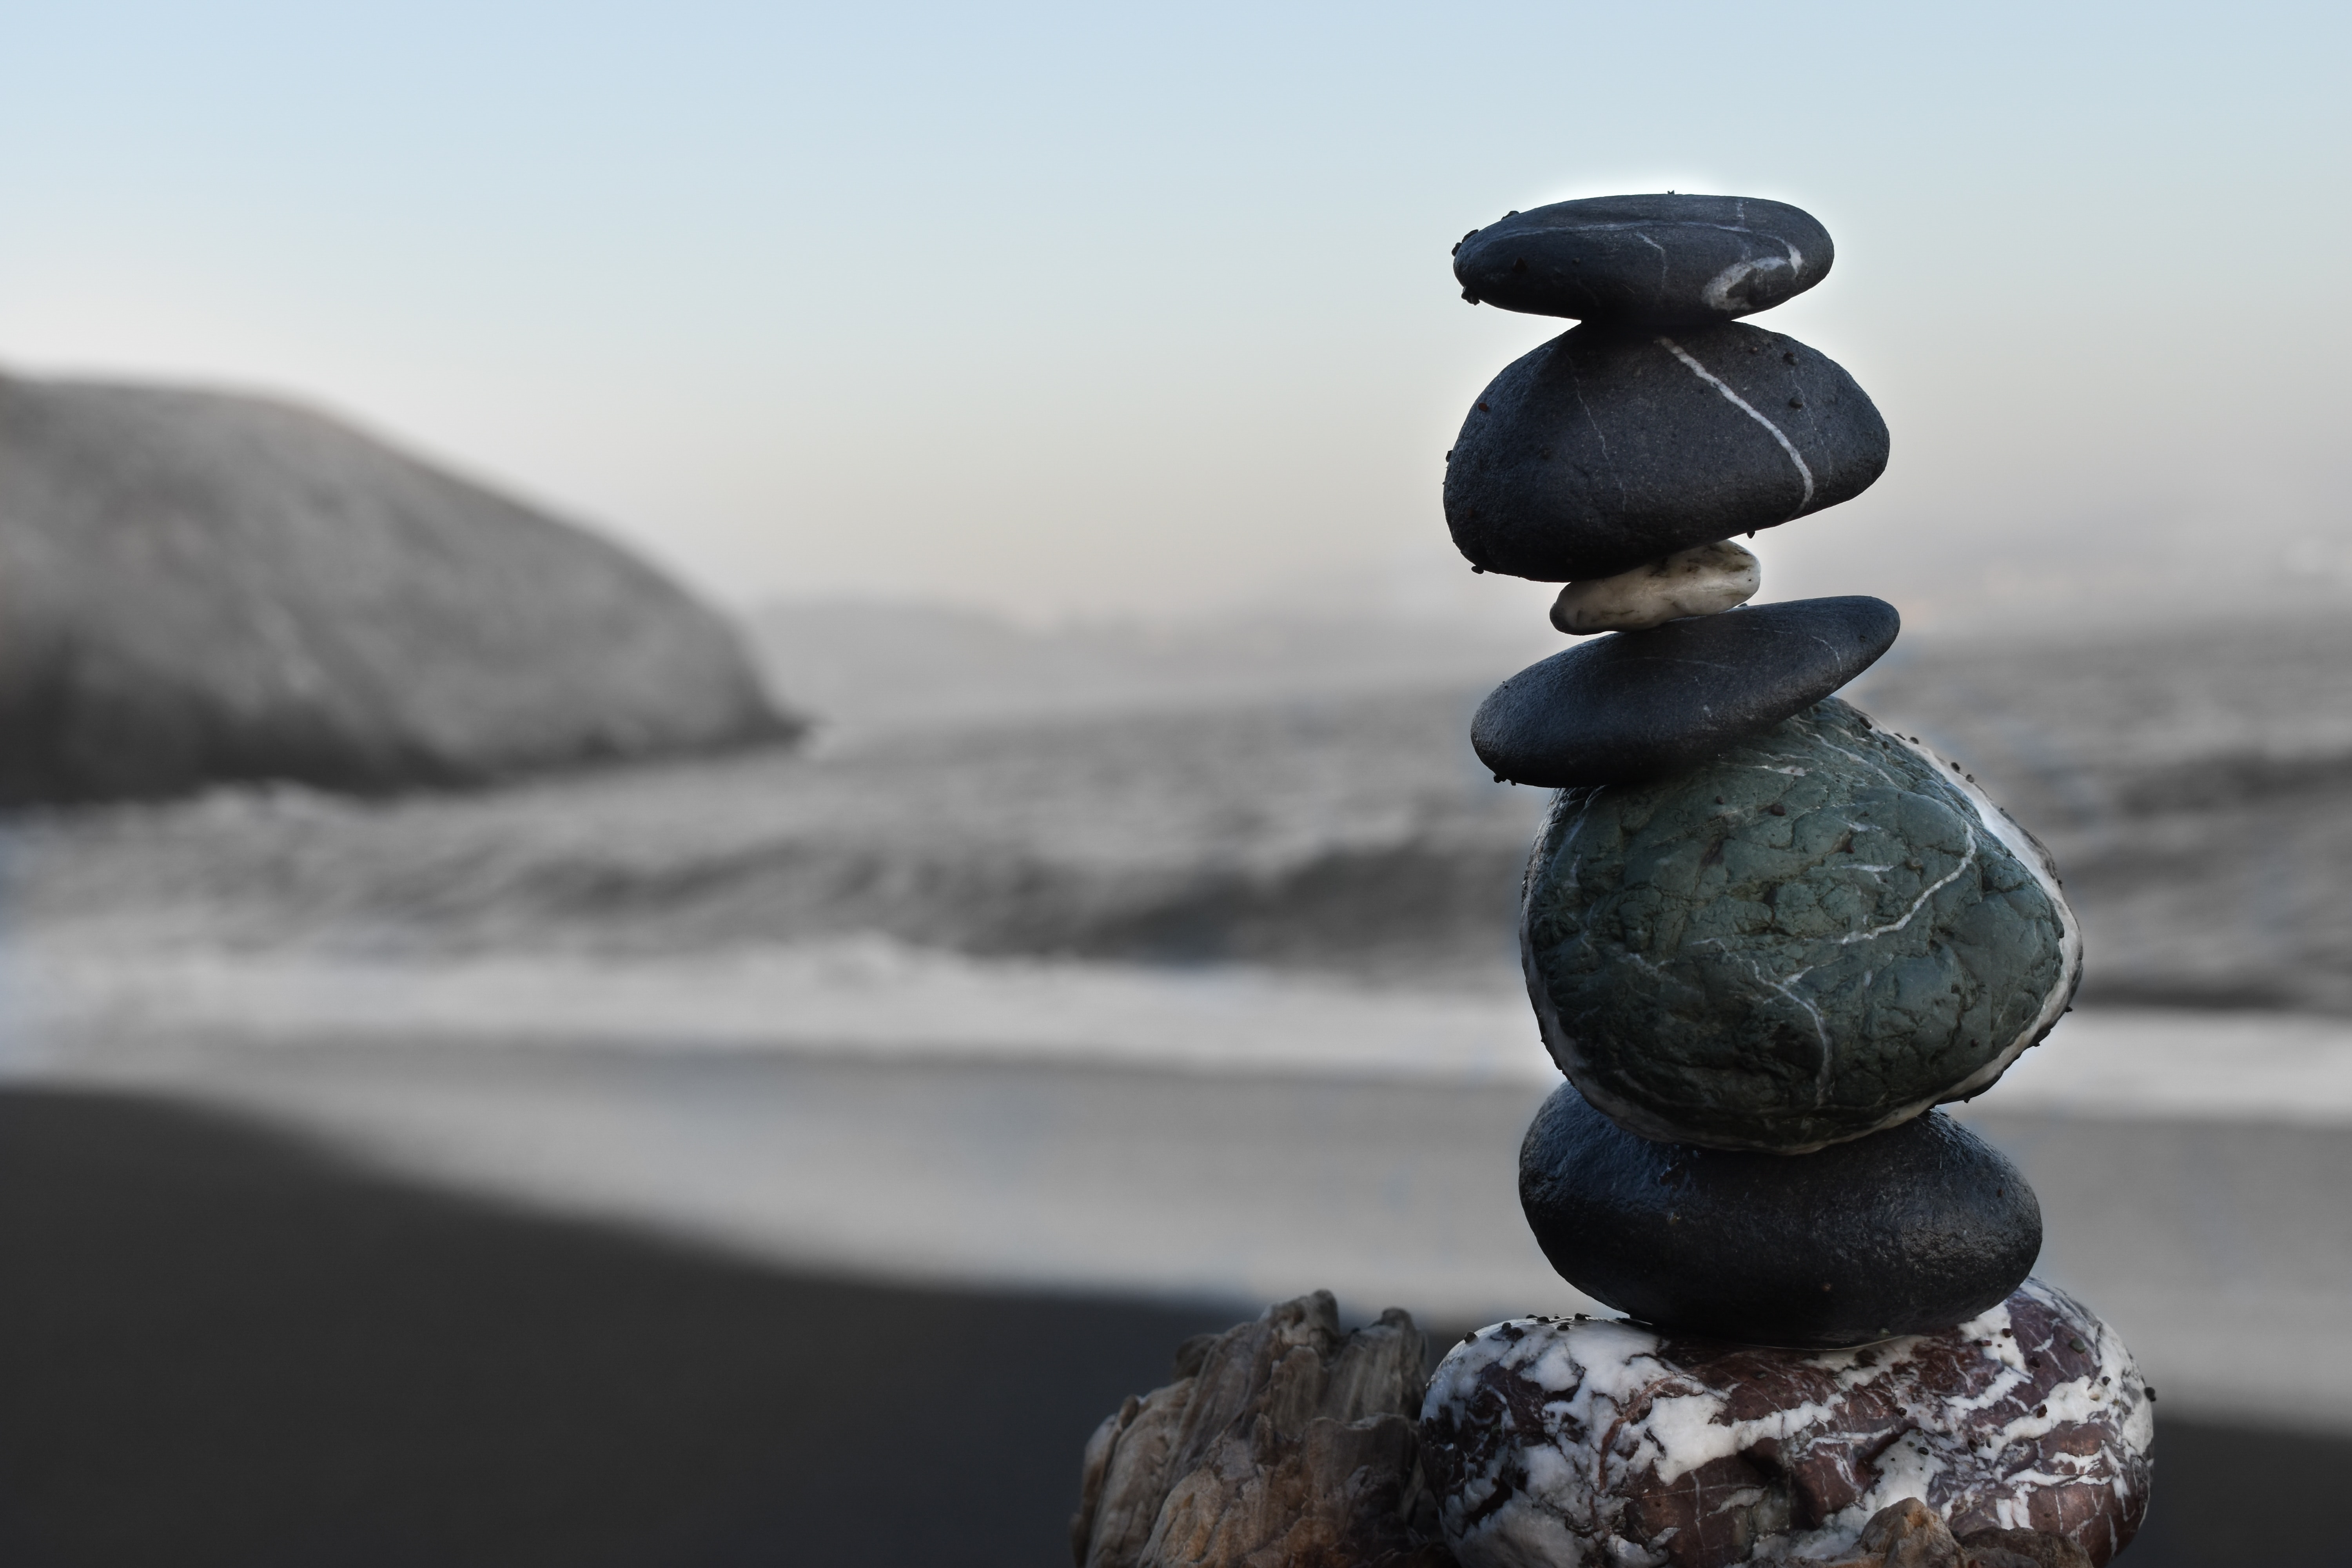 Rocks balanced on top of one another with the sea in the background. | Source: Unsplash